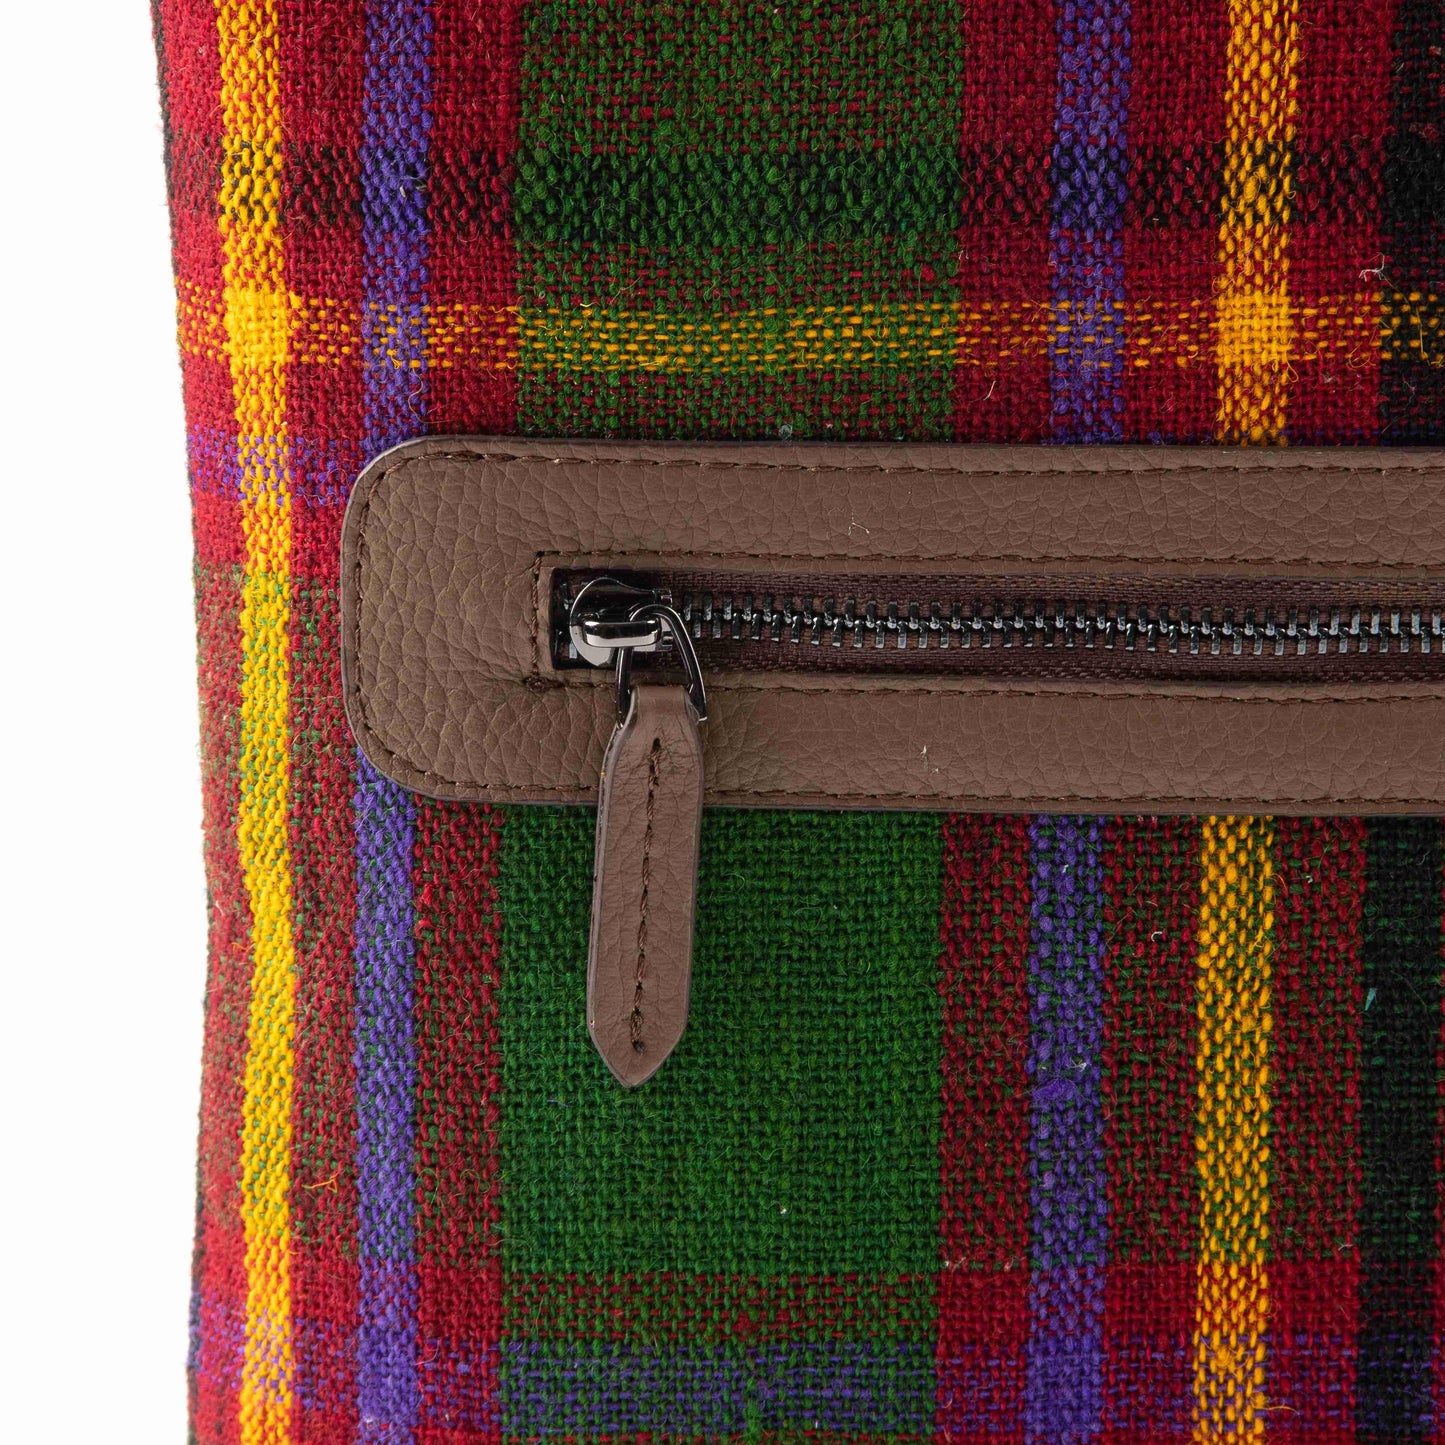 Women's Shoulder Bag Crafted From Handmade Kilim and Real Leather